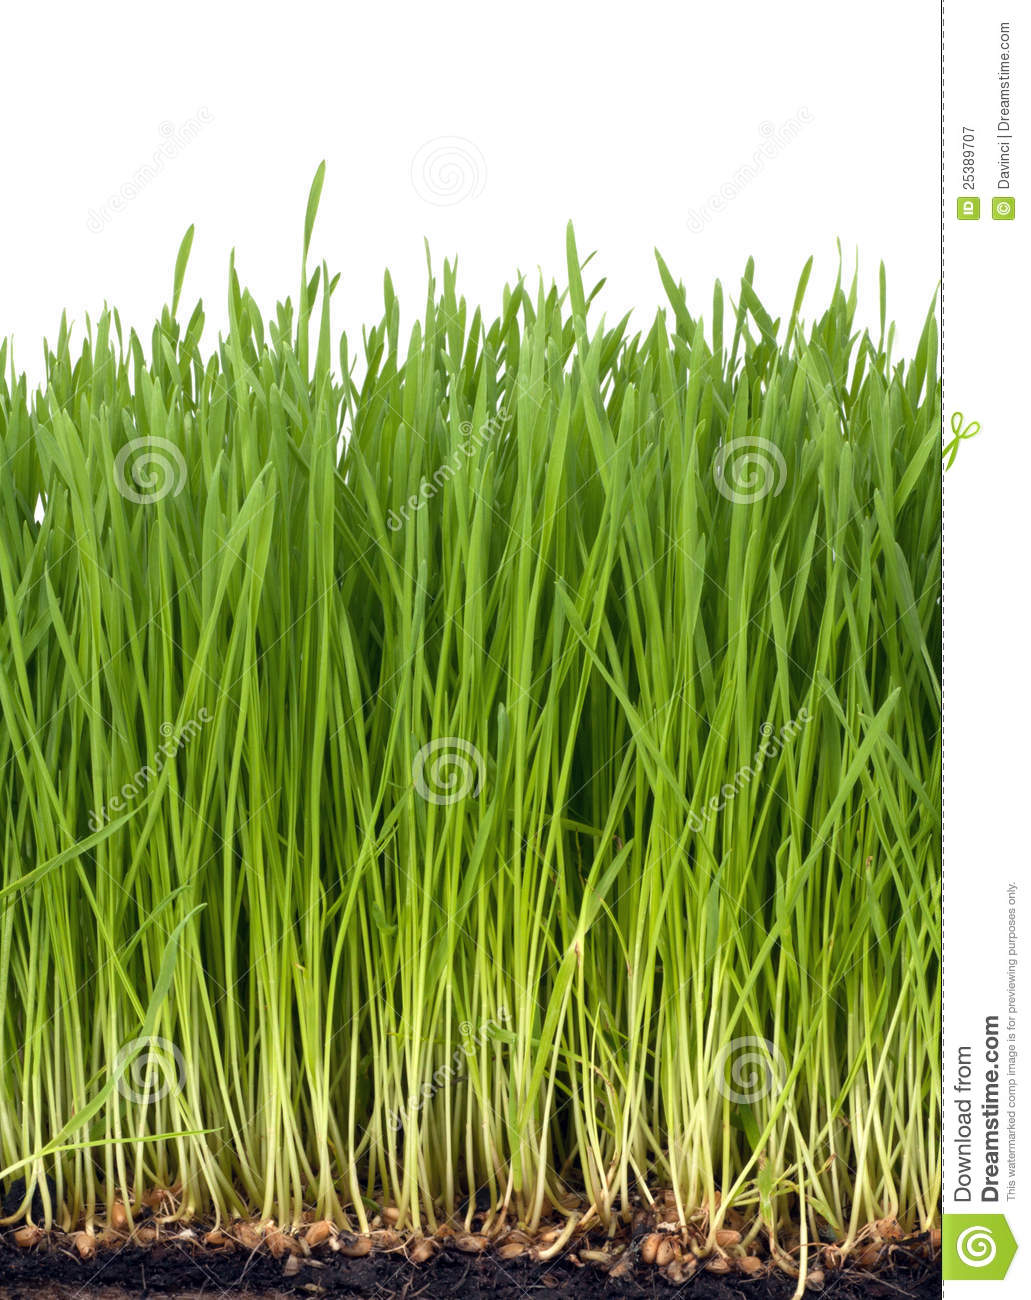 Free Pictures of Wheat Grass